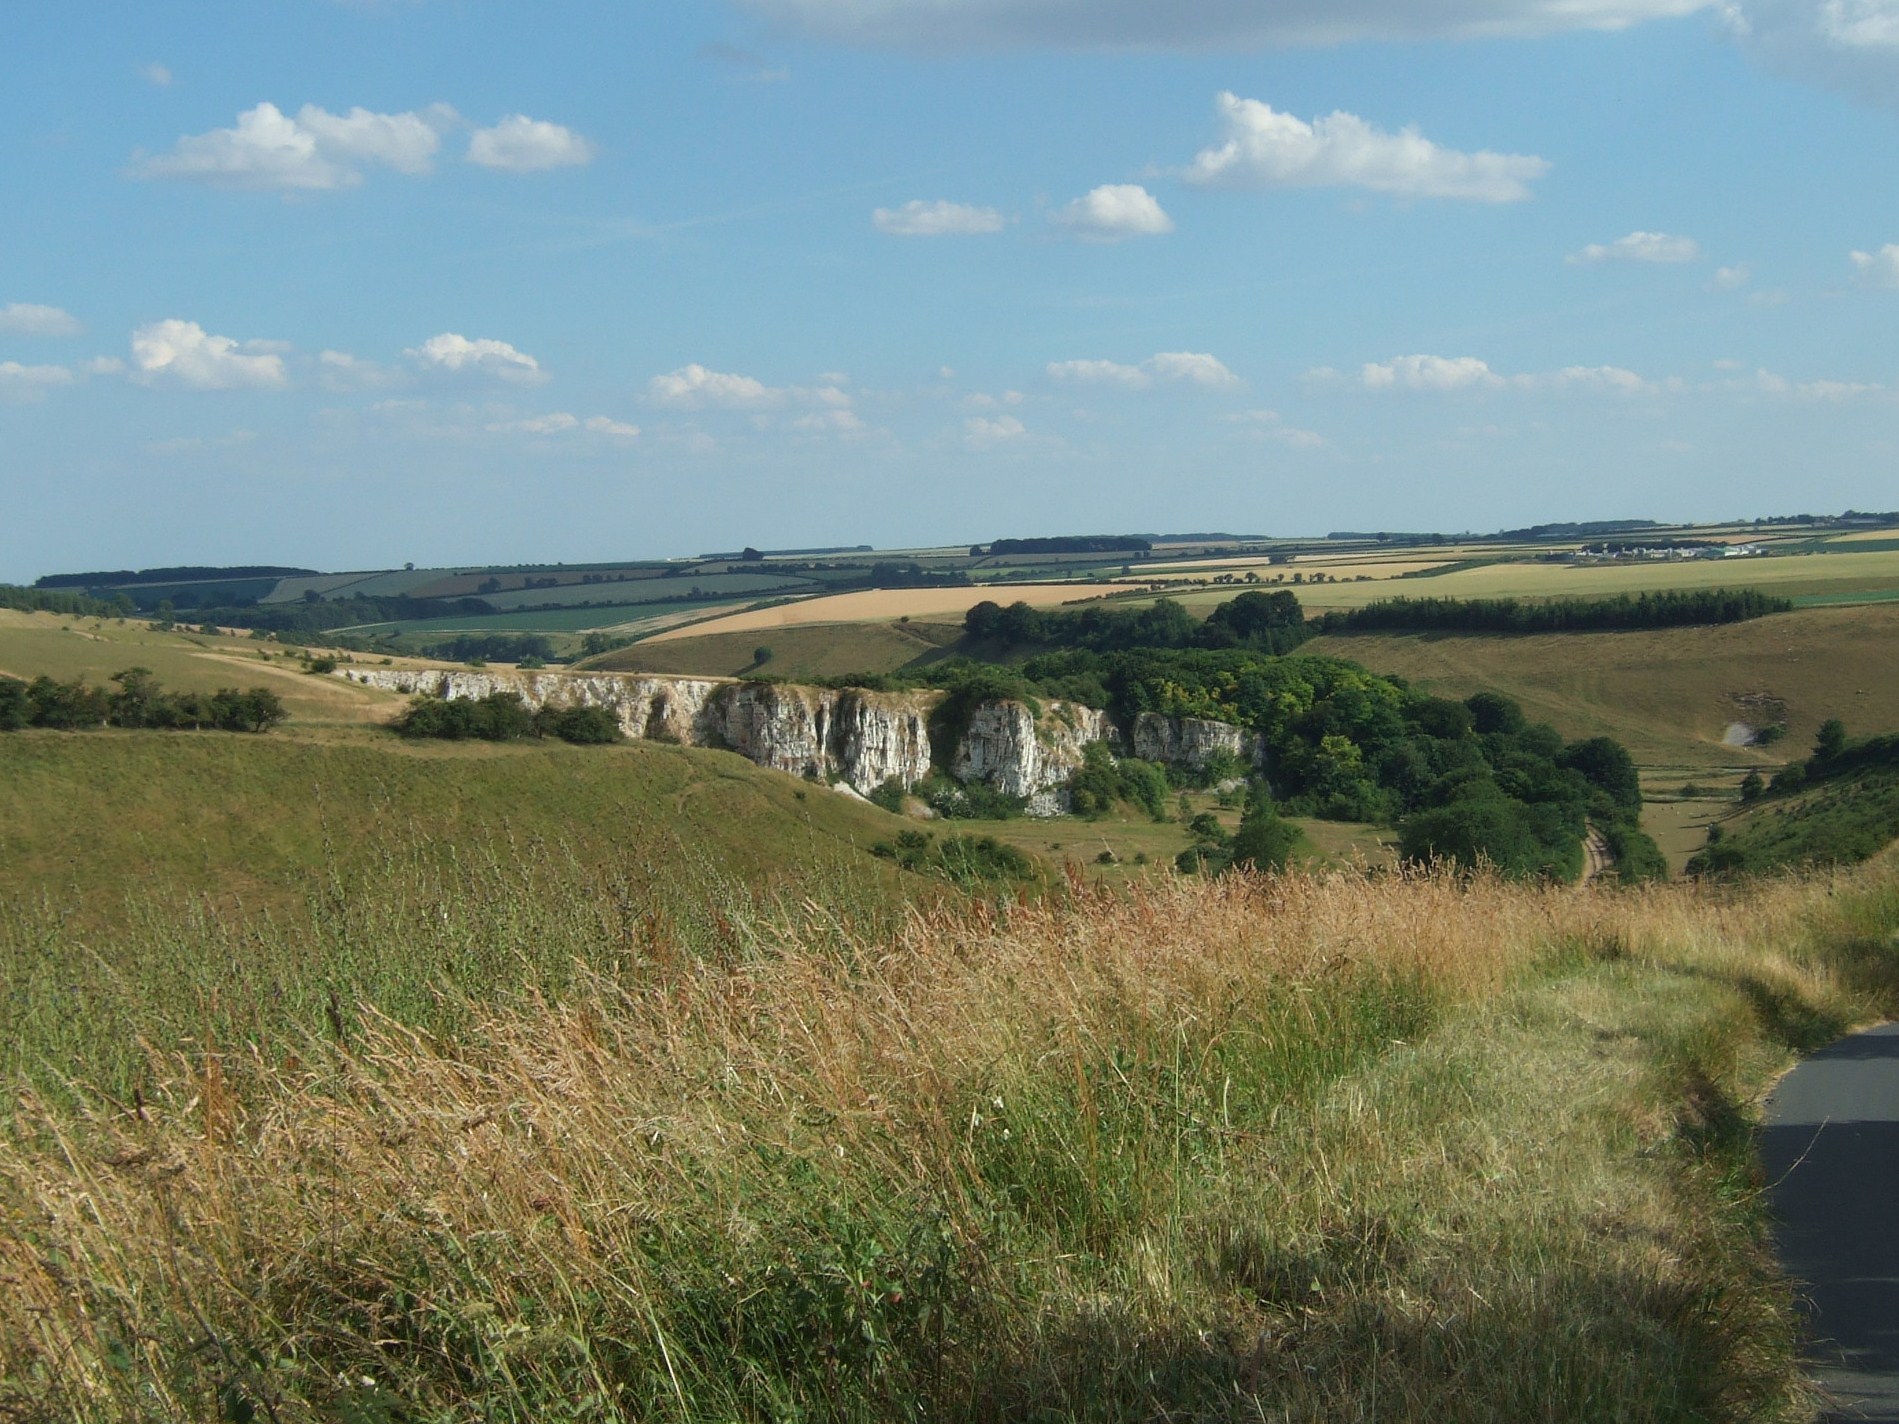 Photograph of Burdale Quarry, Yorkshire Wolds